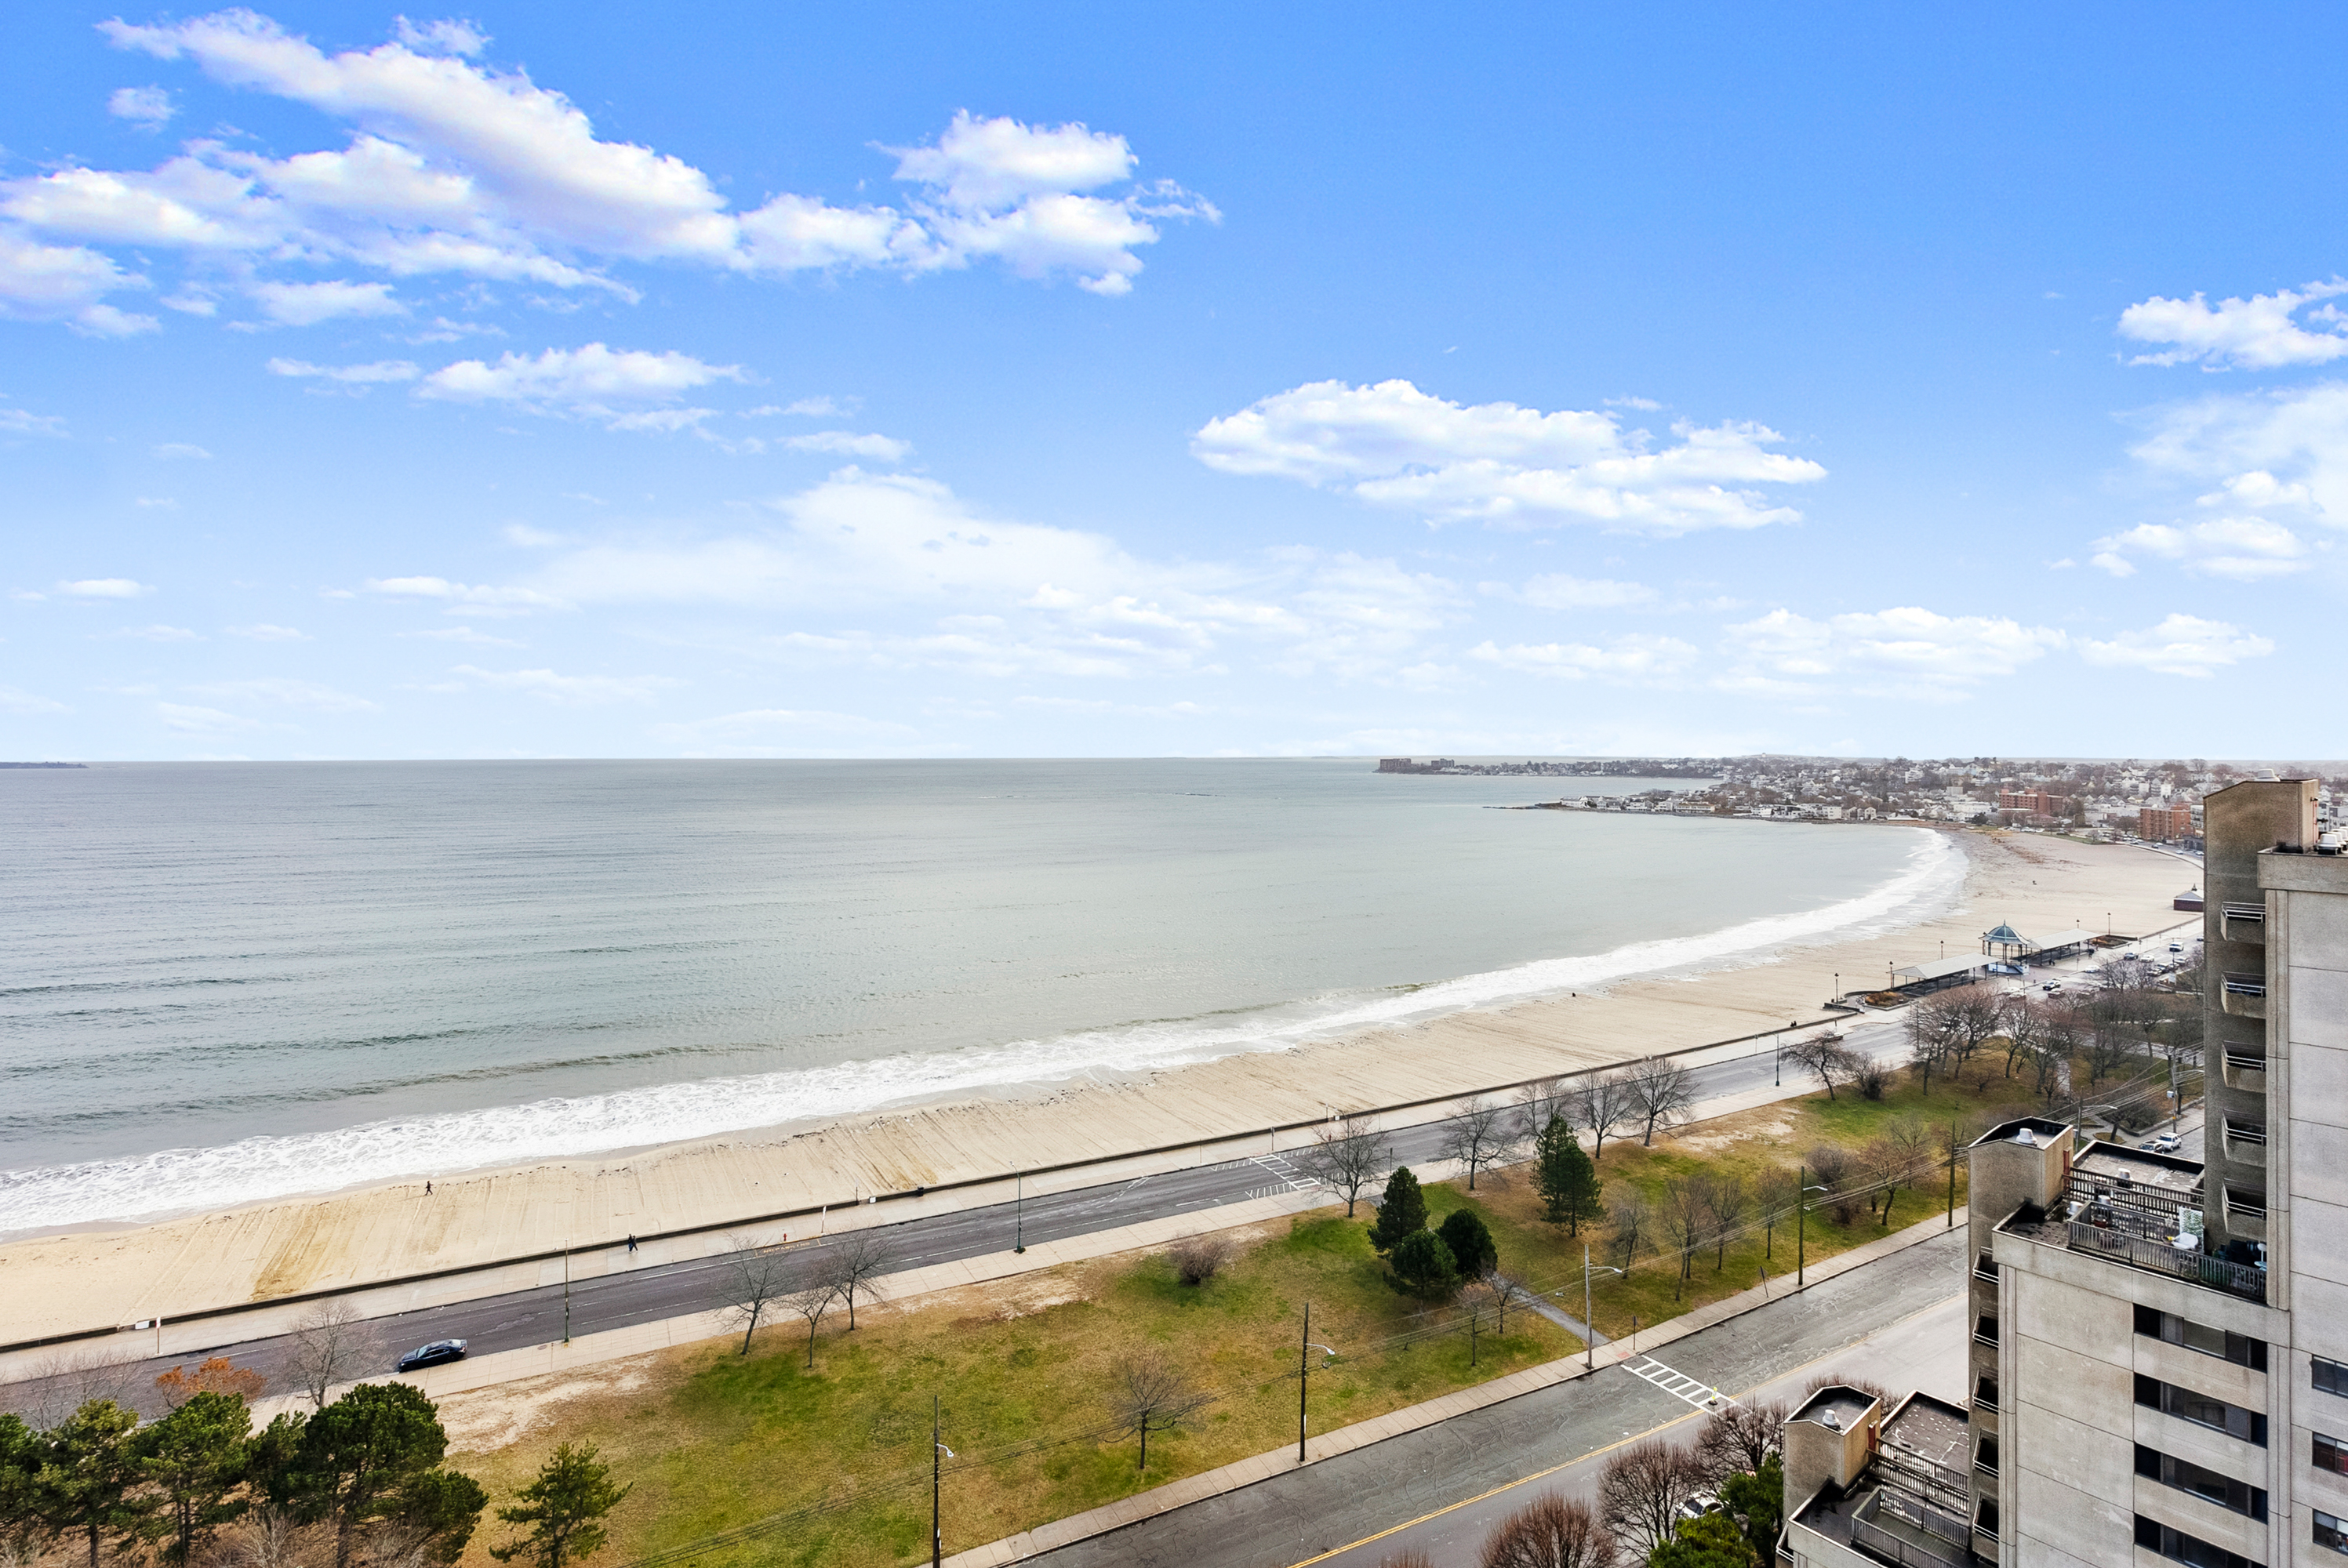 Just Listed: Penthouse 2 Bedroom Condo on Revere Beach